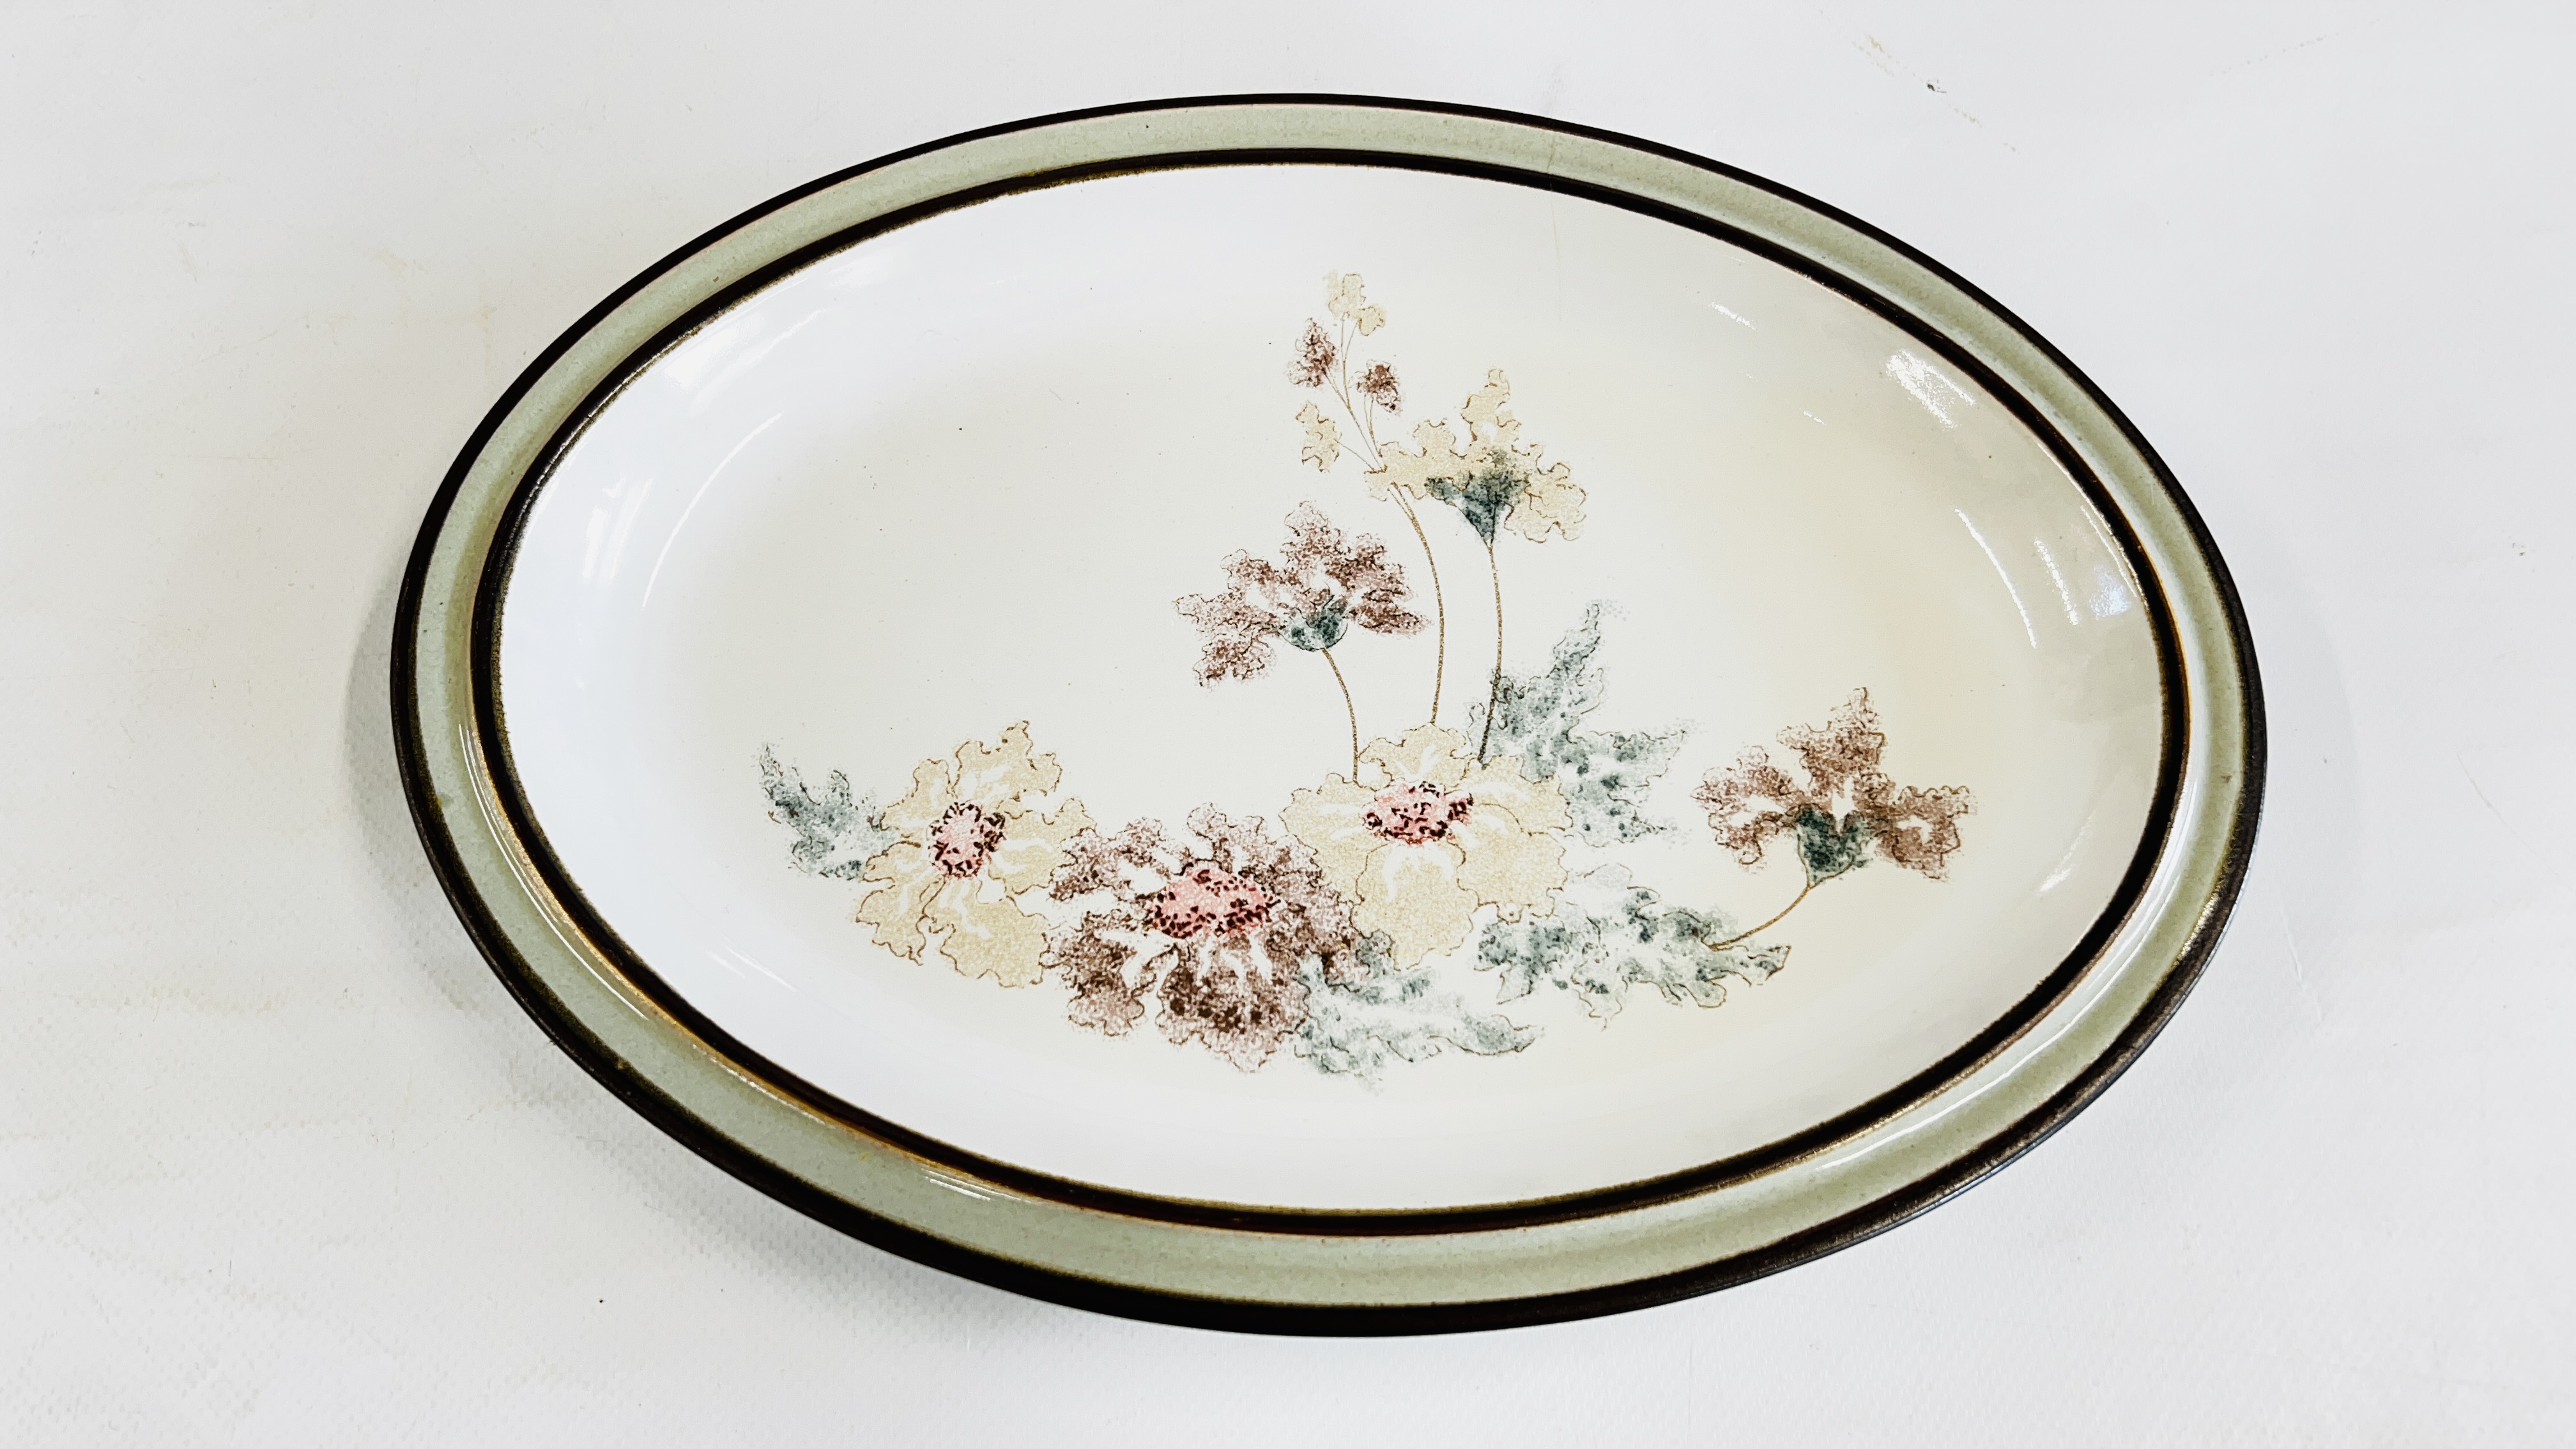 A QUANTITY OF DENBY "ROMANCE" DINNERWARE APPROX 23 PIECES (OVAL PLATE A/F) ALONG WITH A FURTHER 18 - Image 2 of 6